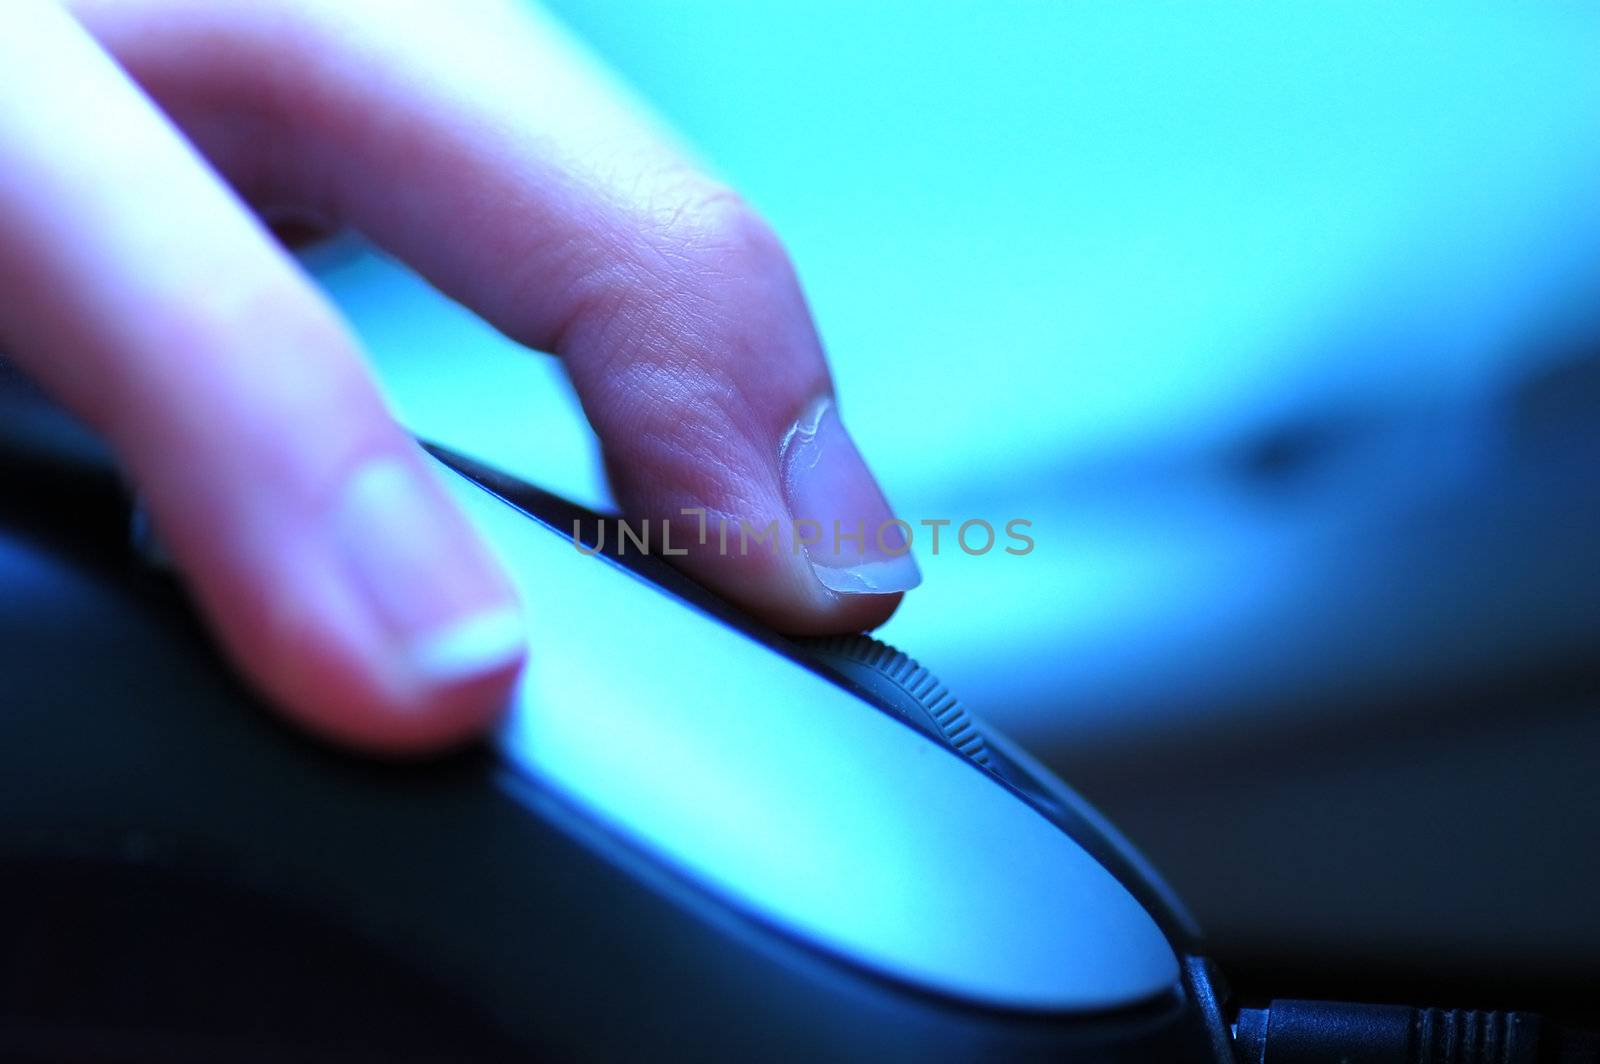 CLICK THE MOUSE! Conceptual image of working with computer